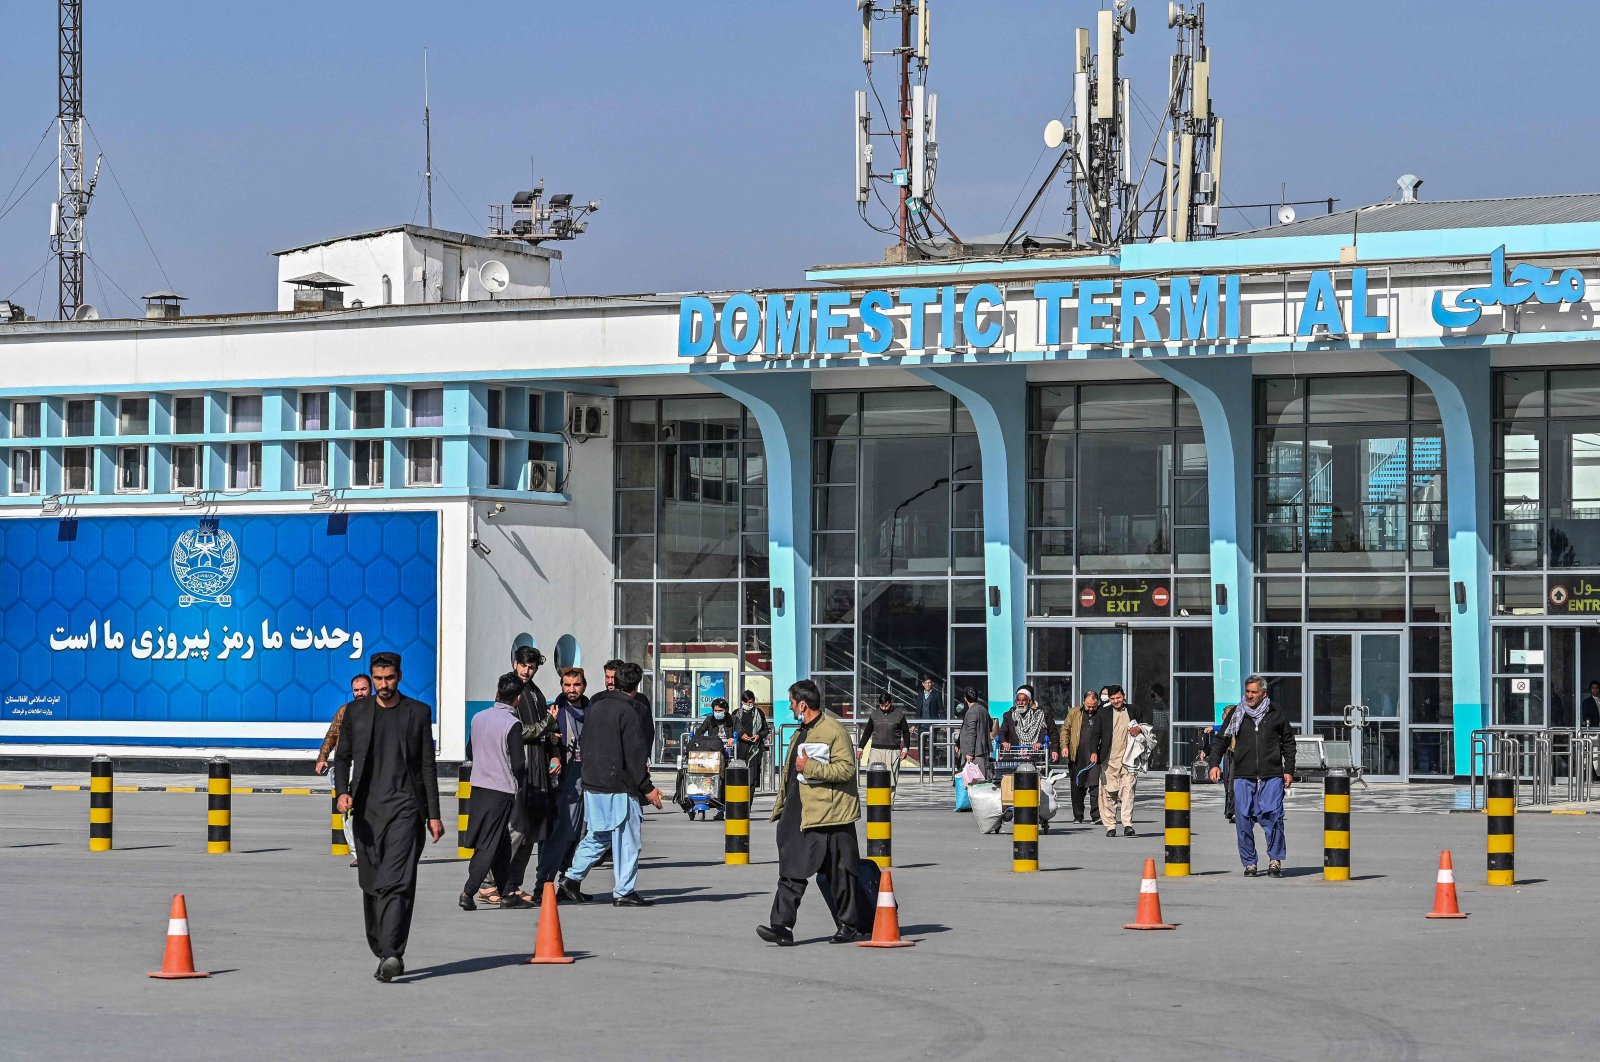 Afghan people walk near the exit gate of the Kabul airport in Kabul on November 24, 2021. (Photo by Hector RETAMAL / AFP)